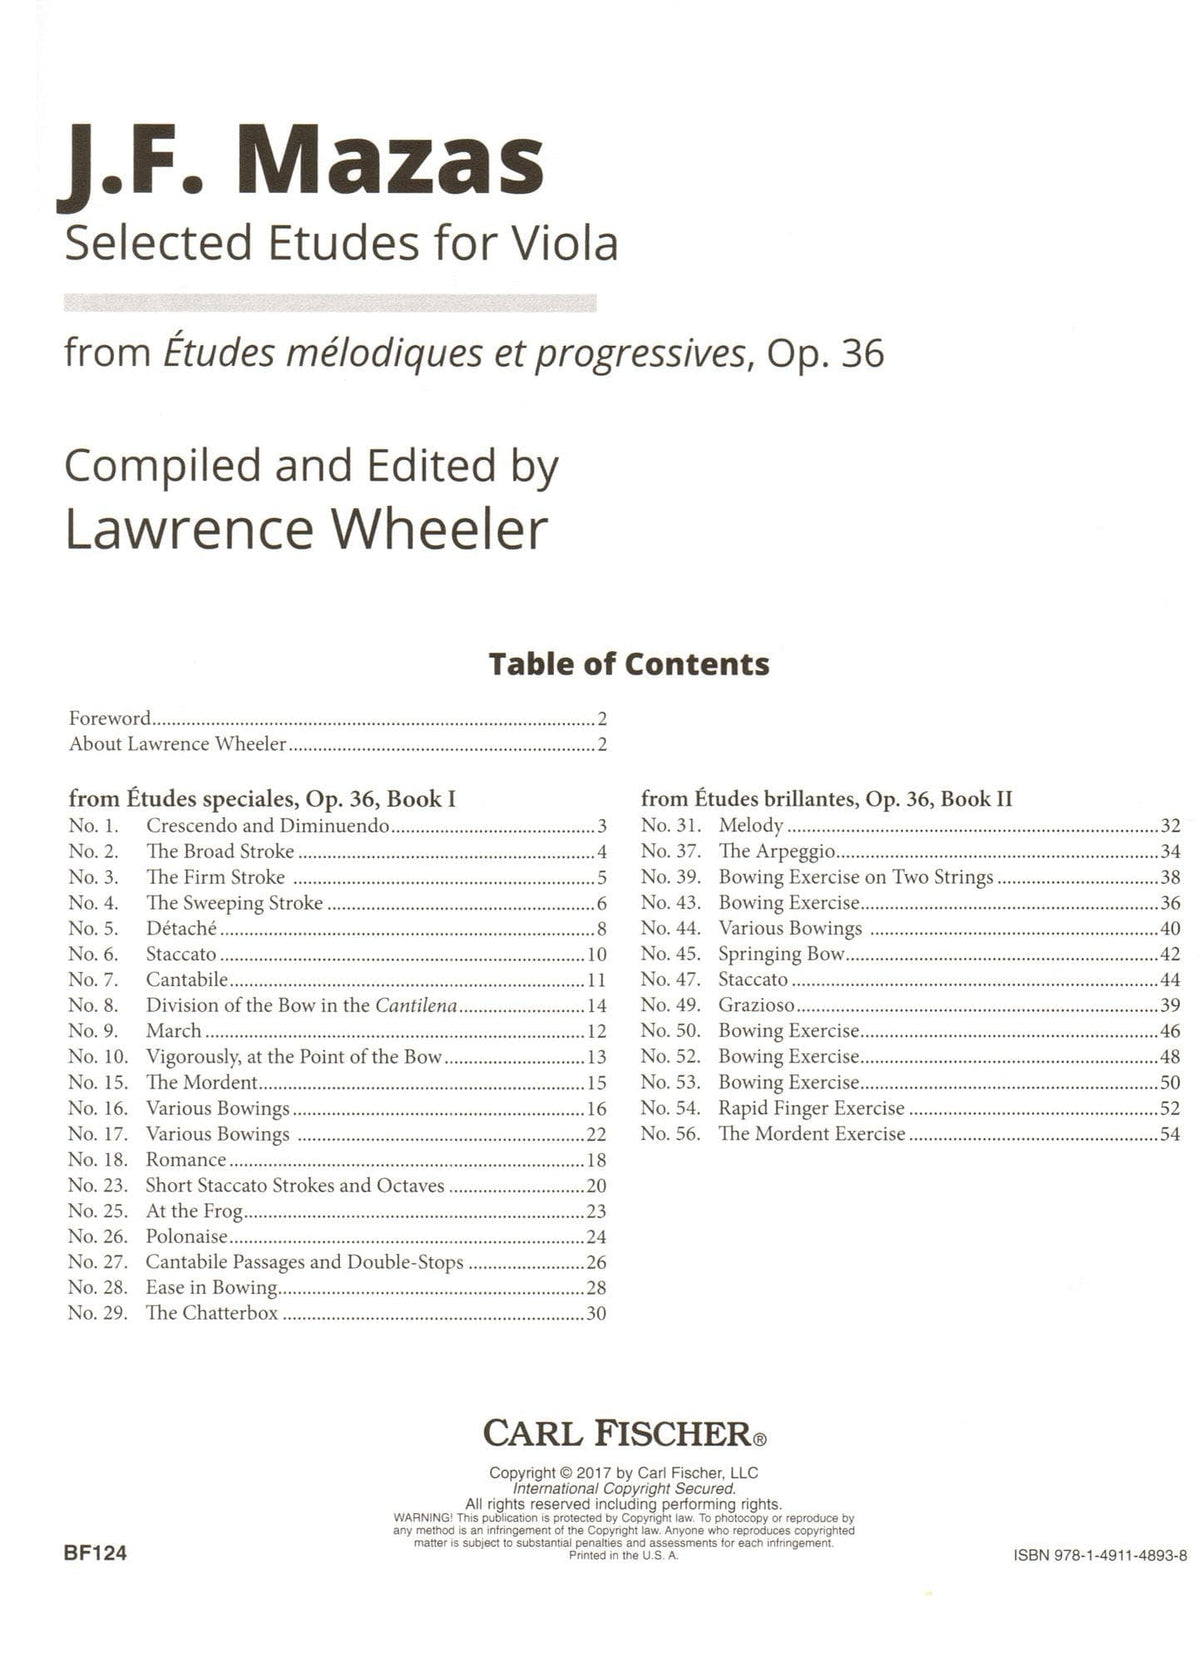 Mazas, J.F. - Selected Etudes for Viola, from Op. 36 - for Solo Viola - edited by Lawrence Wheeler - Carl Fischer